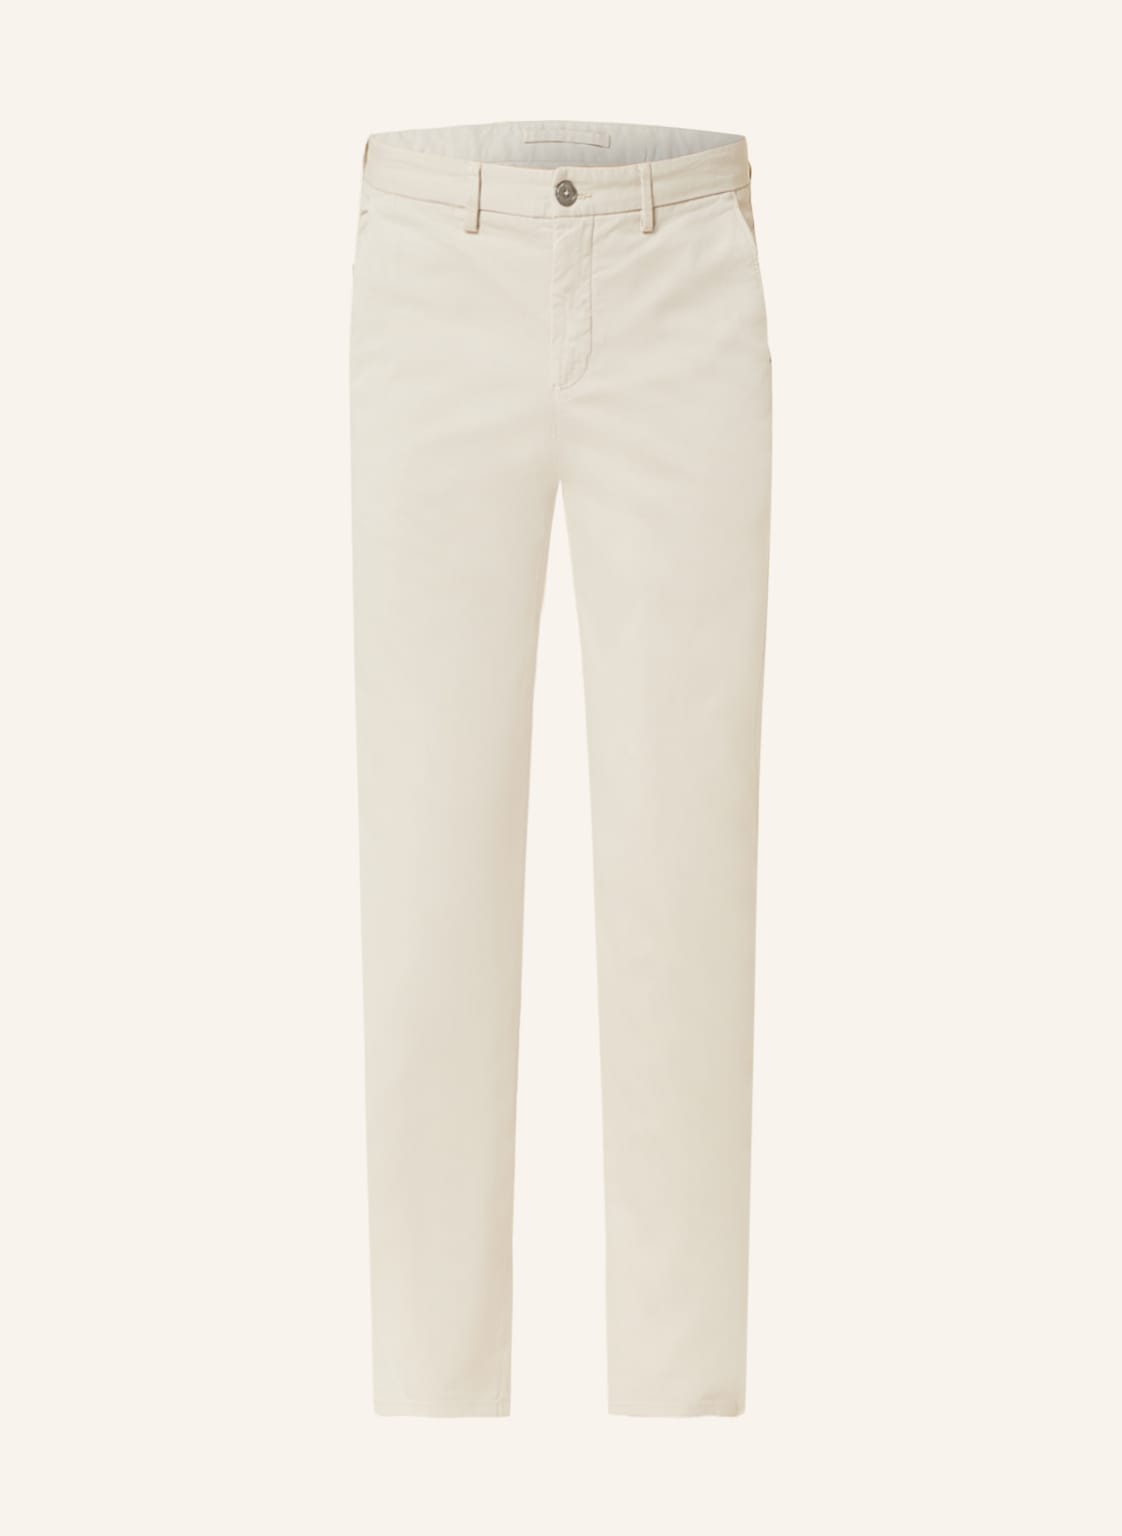 Image of Profuomo Chino Extra Slim Fit beige